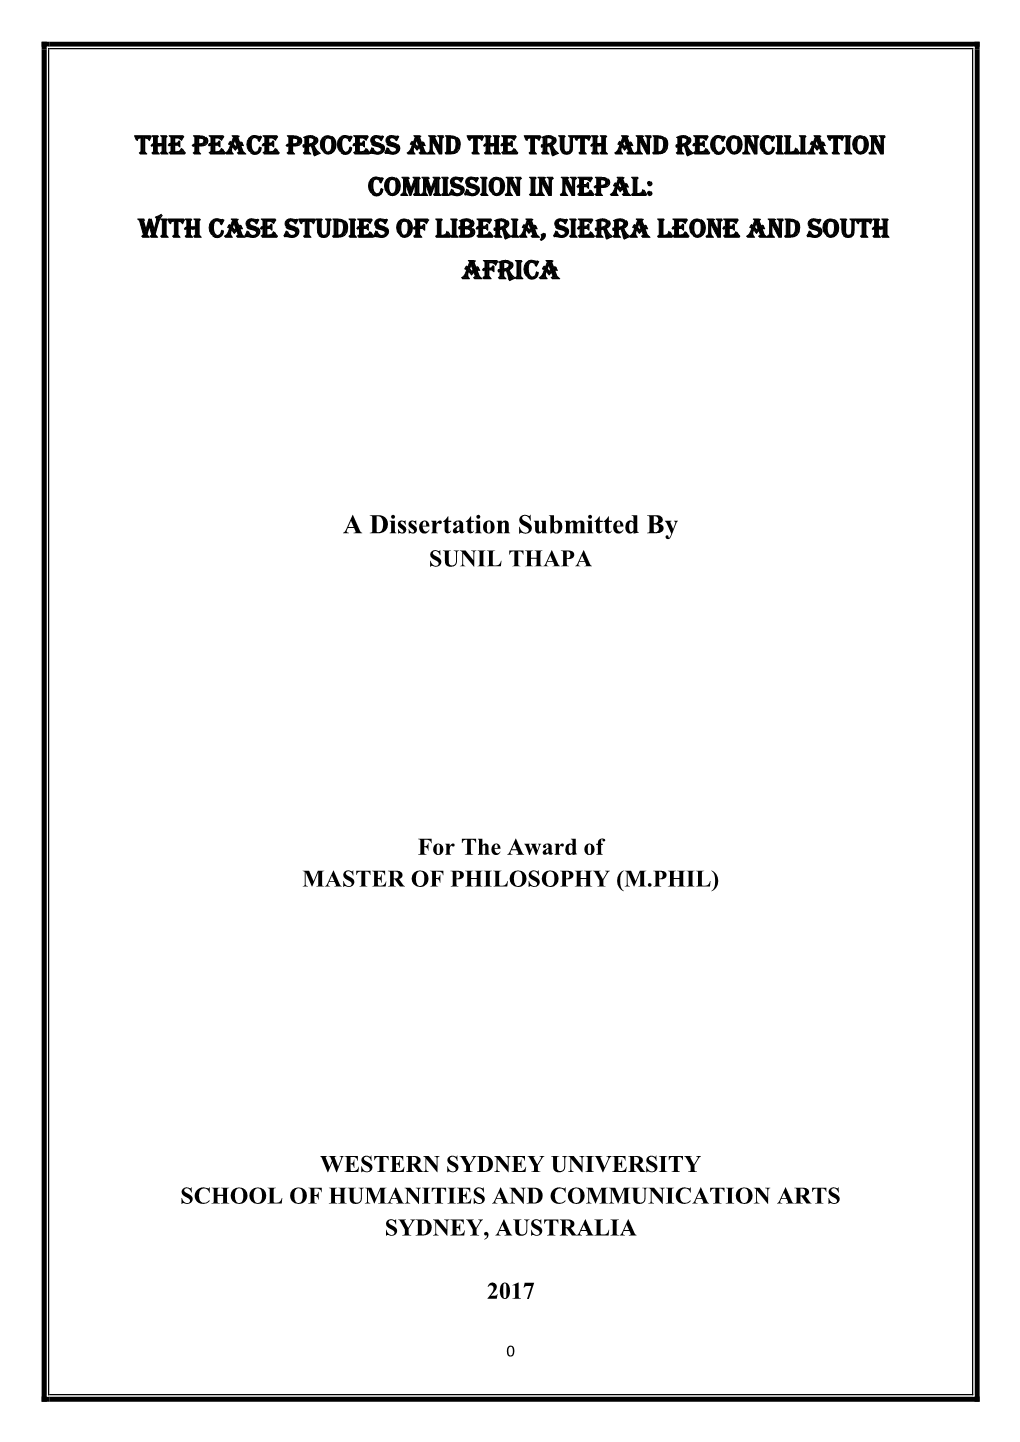 With Case Studies of Liberia, Sierra Leone and South Africa